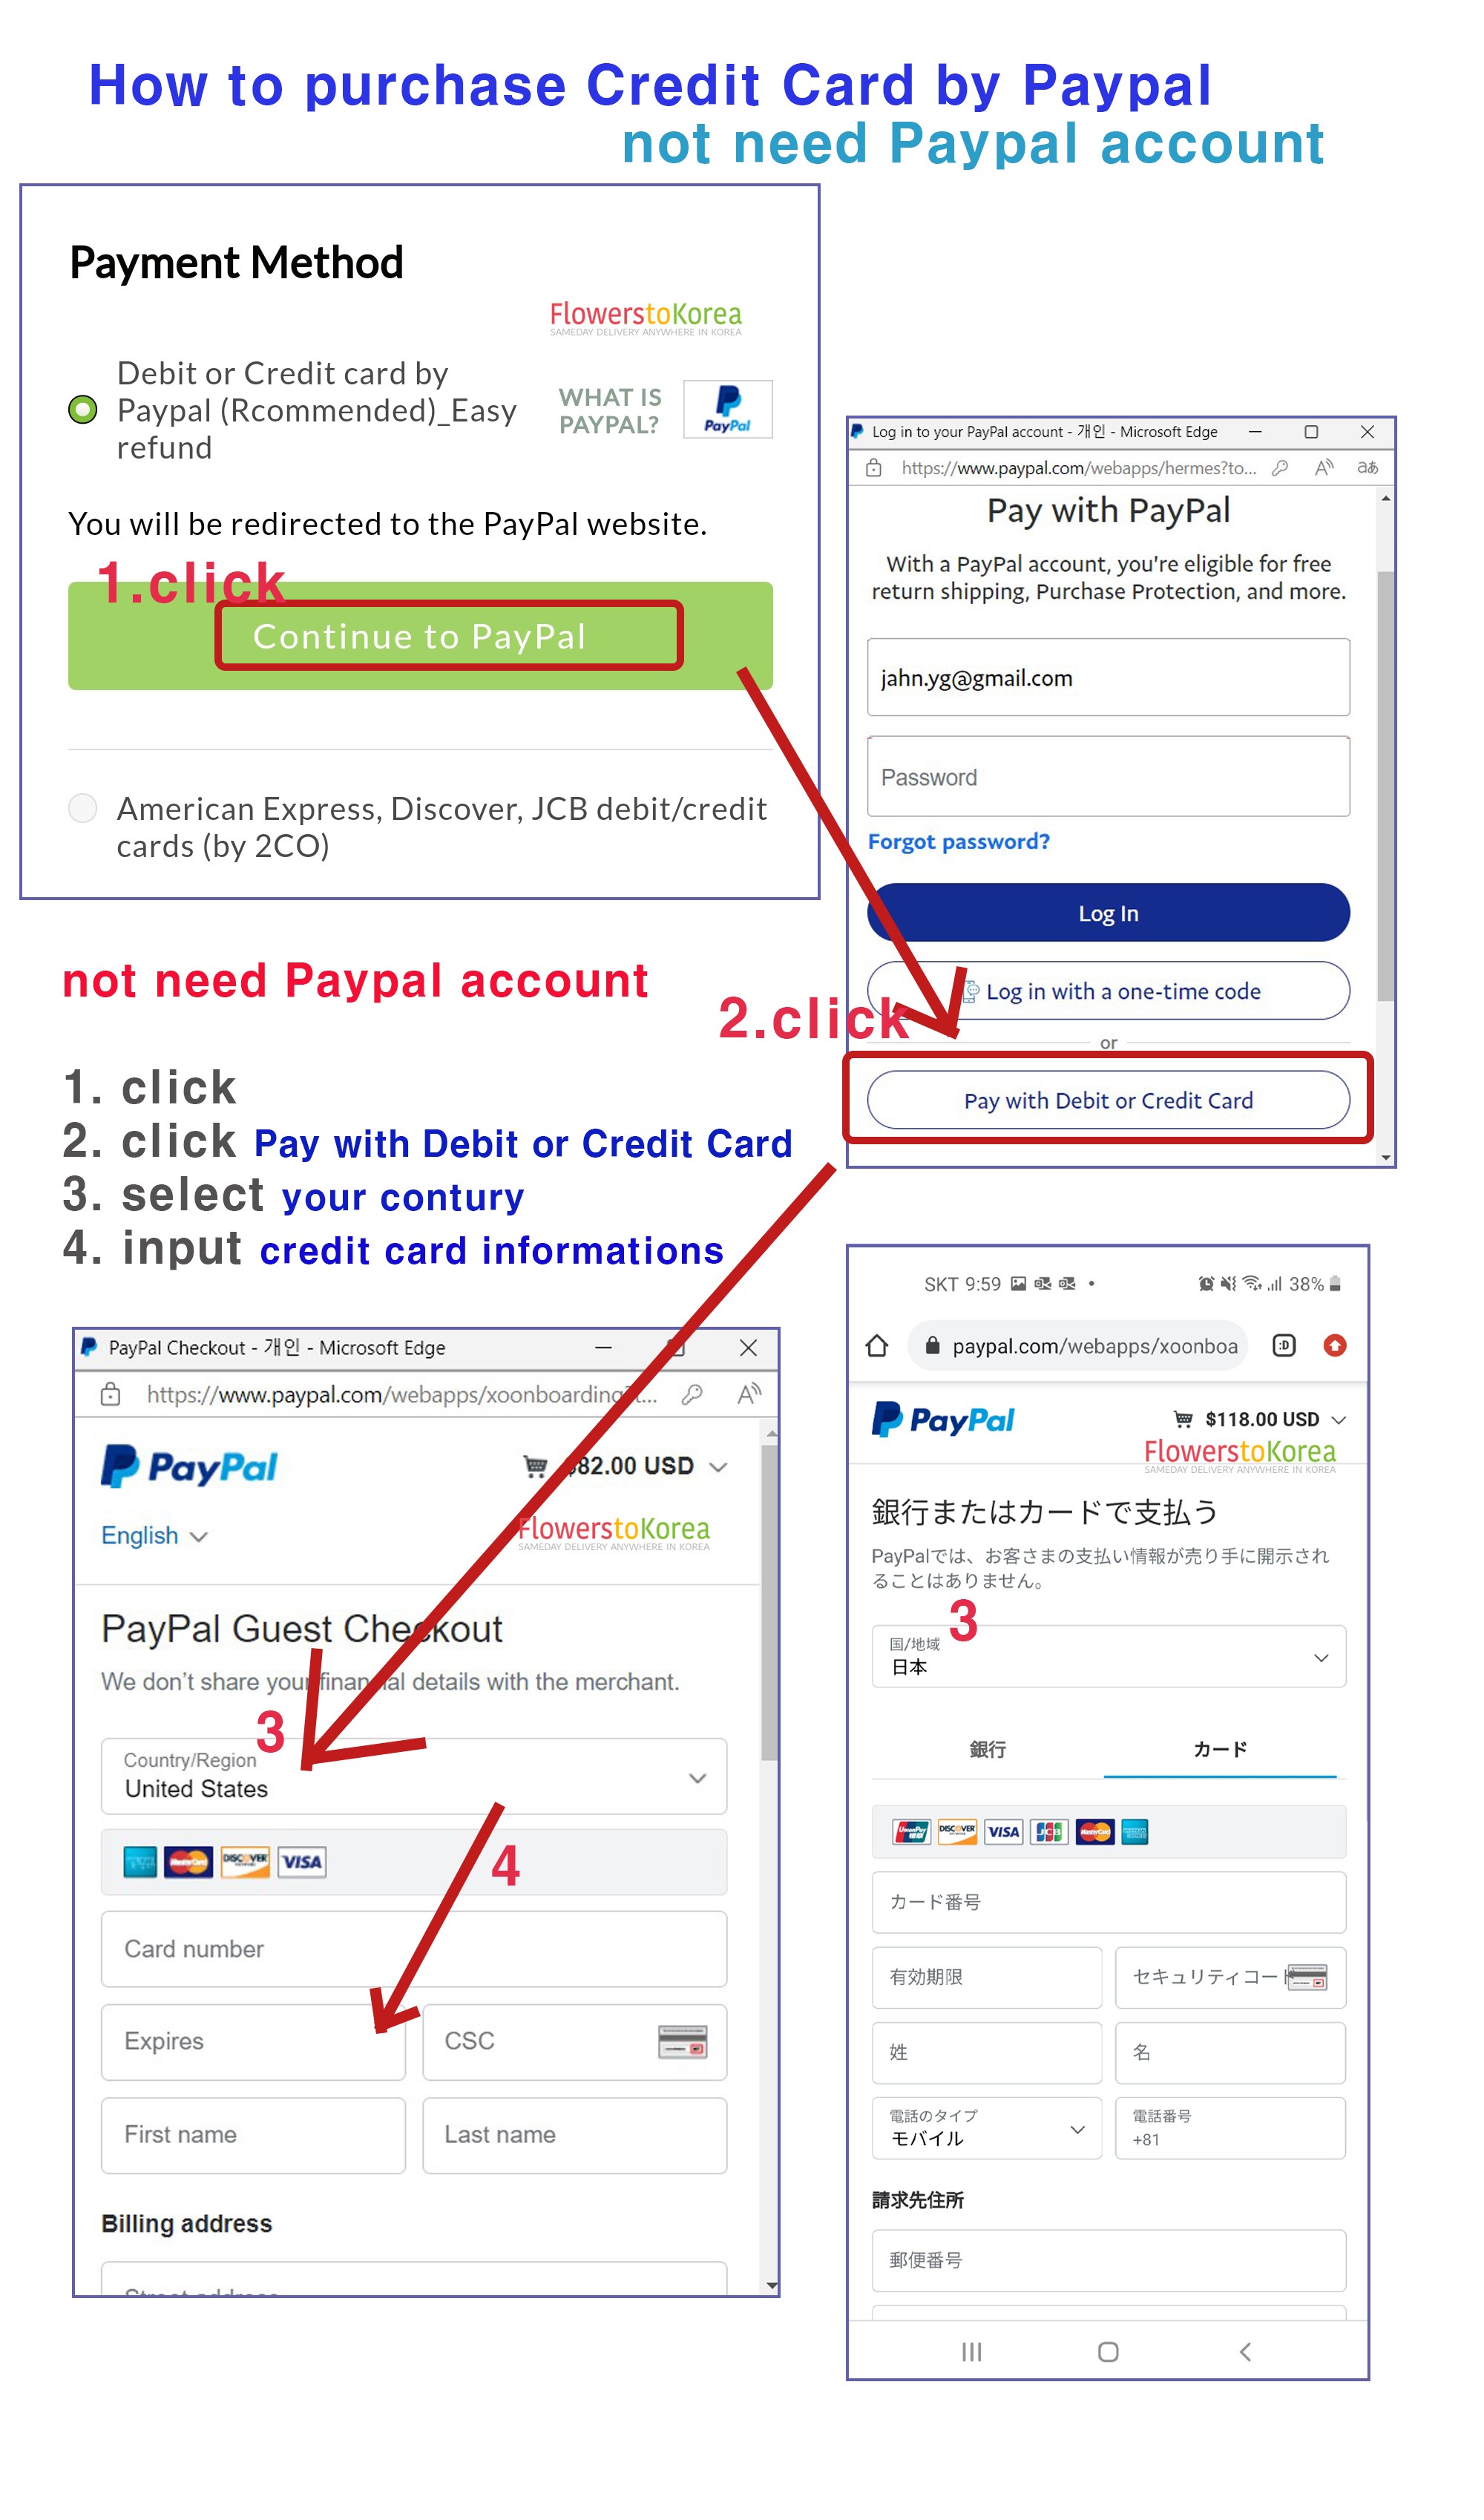 How to create new a paypal account?